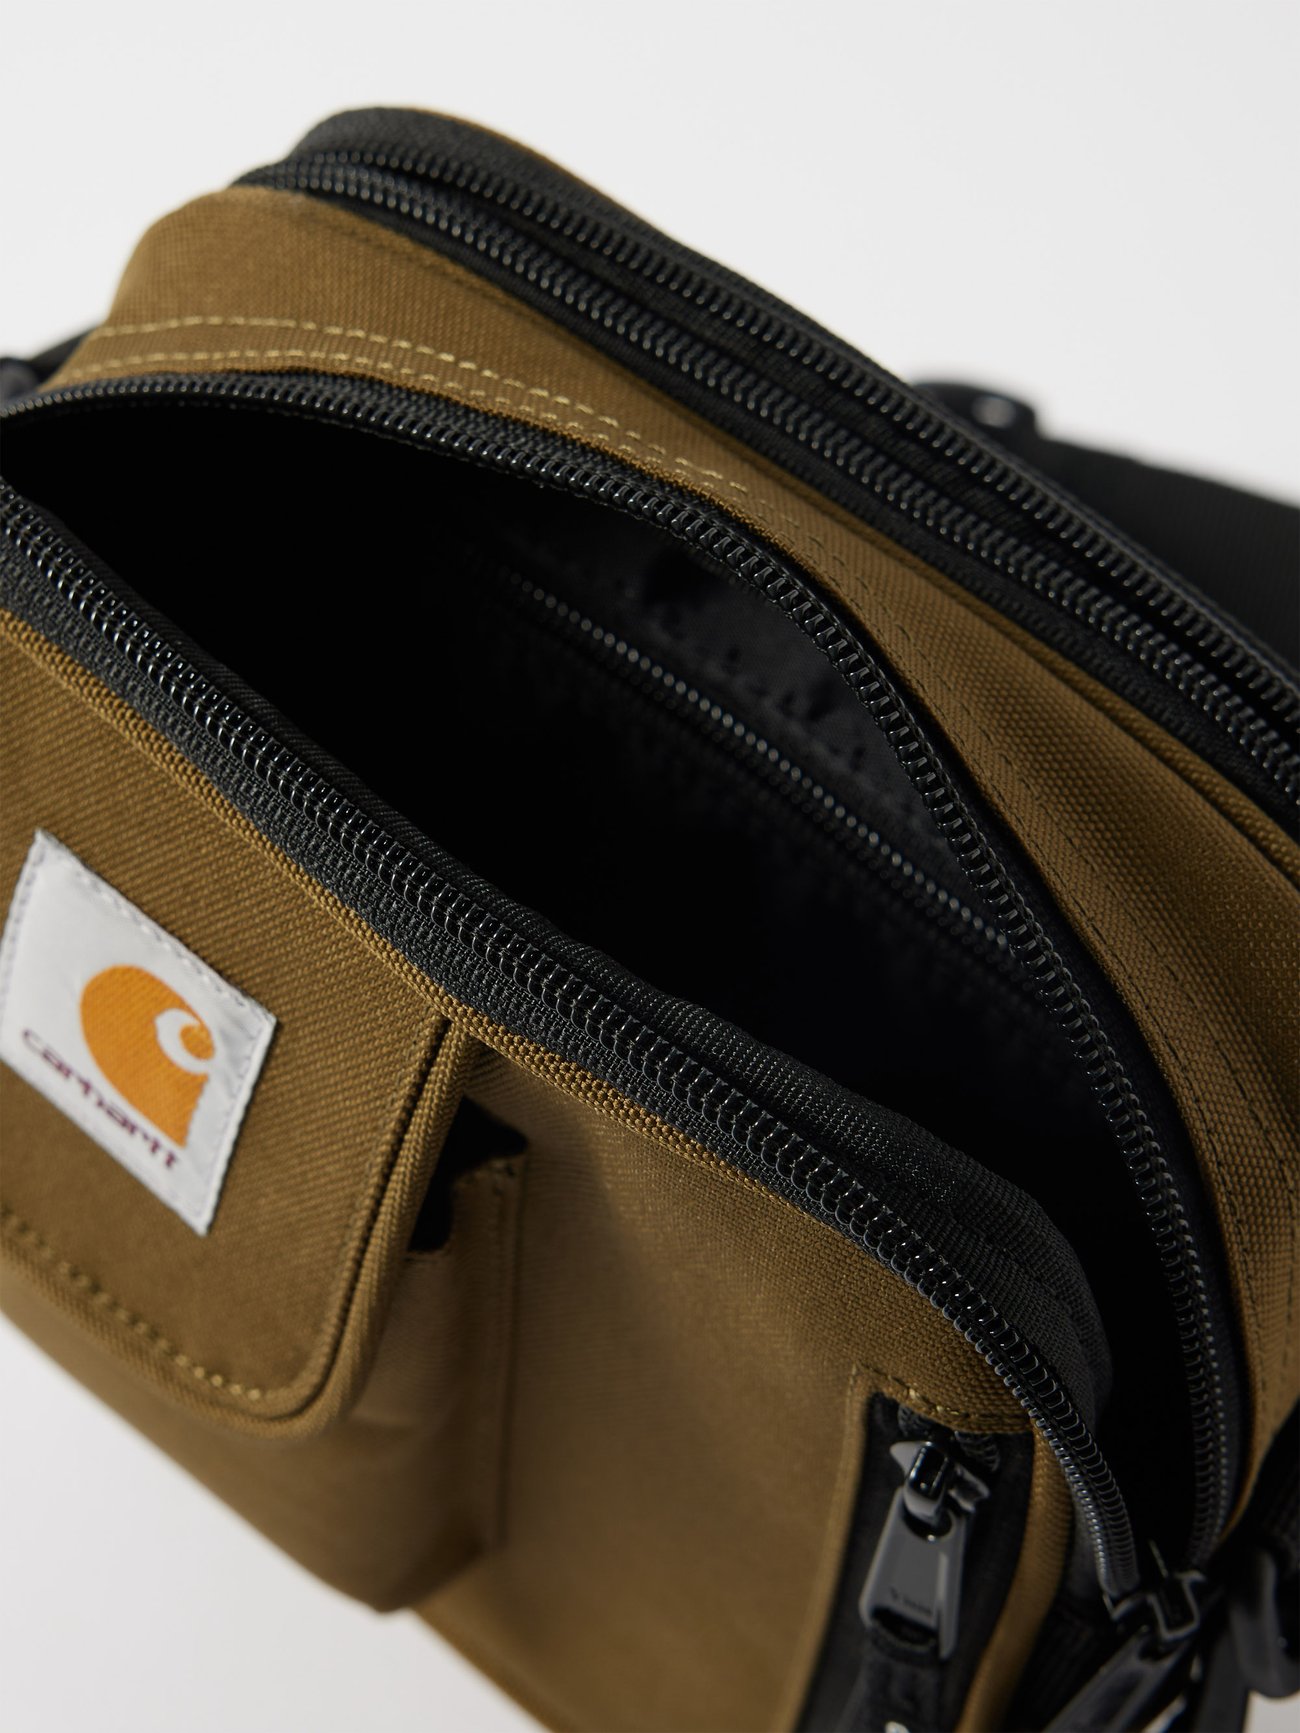 Carhartt WIP Essentials Bag Small - Black - BRAND NEW WITH TAGS